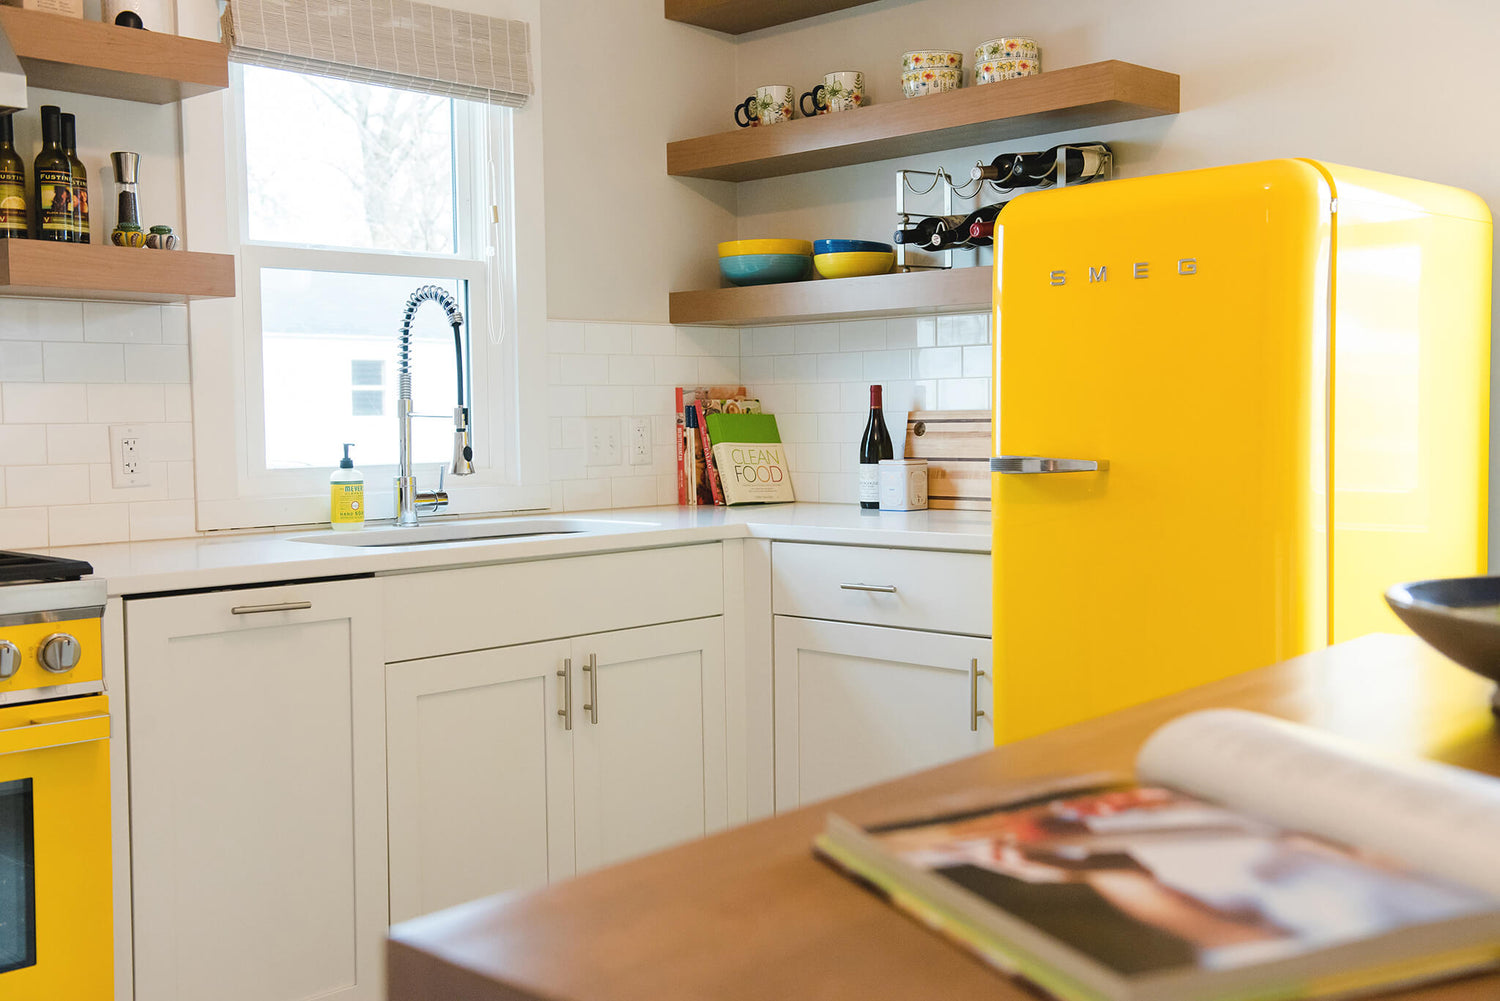 Mid-century modern kitchen with custom white shaker cabinets, yellow SMEG appliances, and floating shelves